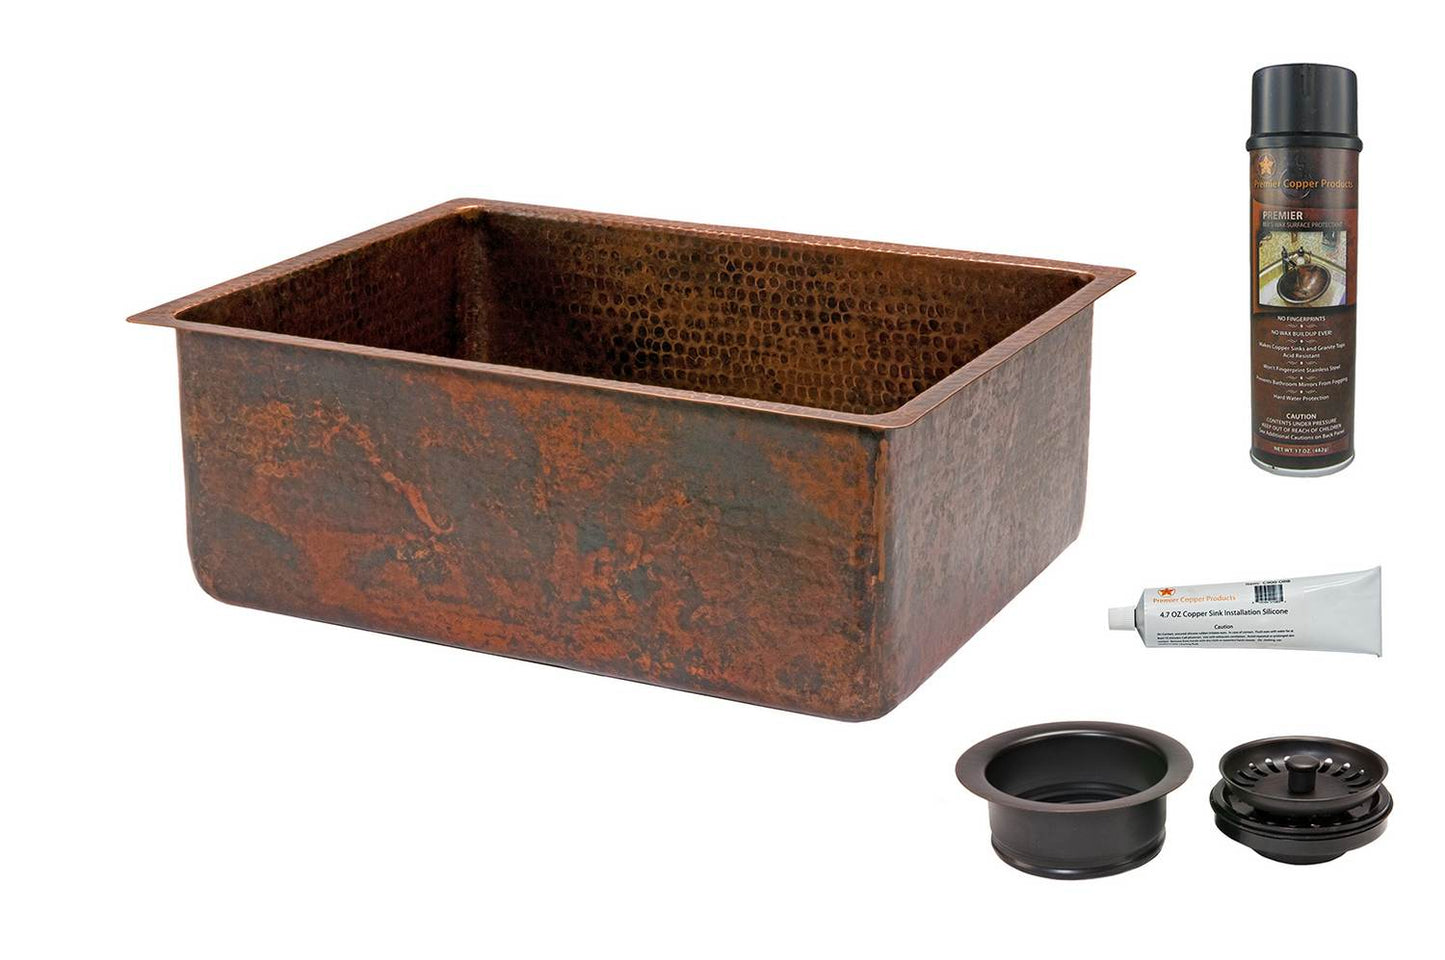 KSP3_KSDB25199 25 Inch Hammered Premier Copper Kitchen Single Basin Sink with Matching Drain and Accessories